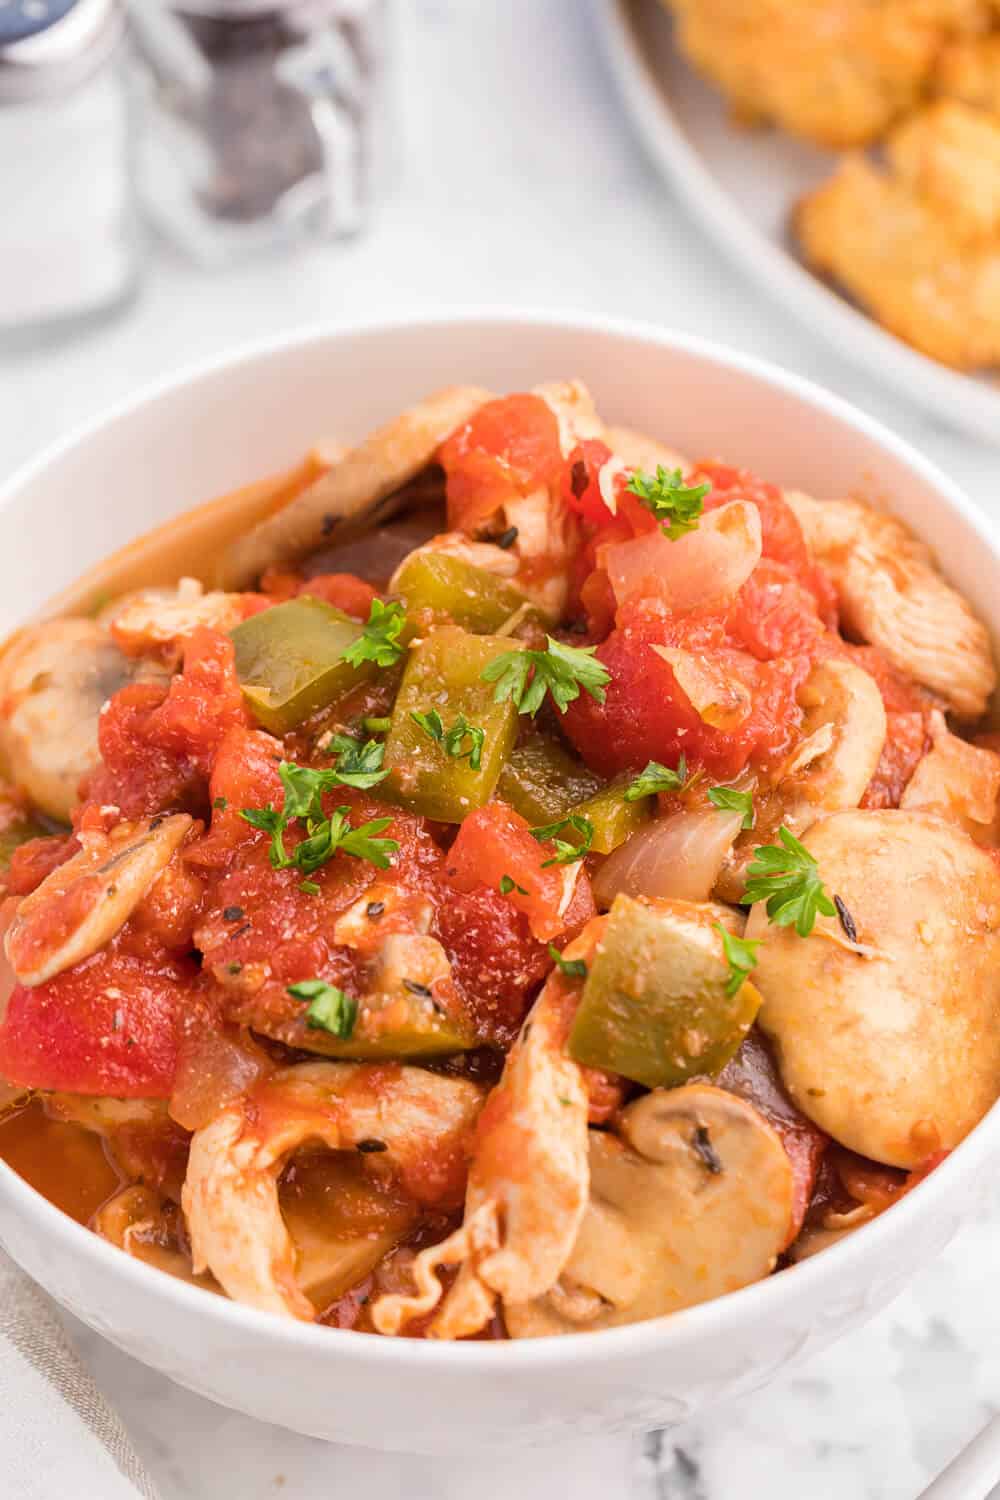 One-Pot Chicken Cacciatore - This is a delicious pantry staple casserole. Made with common ingredients like chicken, green peppers, mushrooms, onions and canned tomatoes, you can throw the ingredients in just one pot - quick to make and quick to clean up!